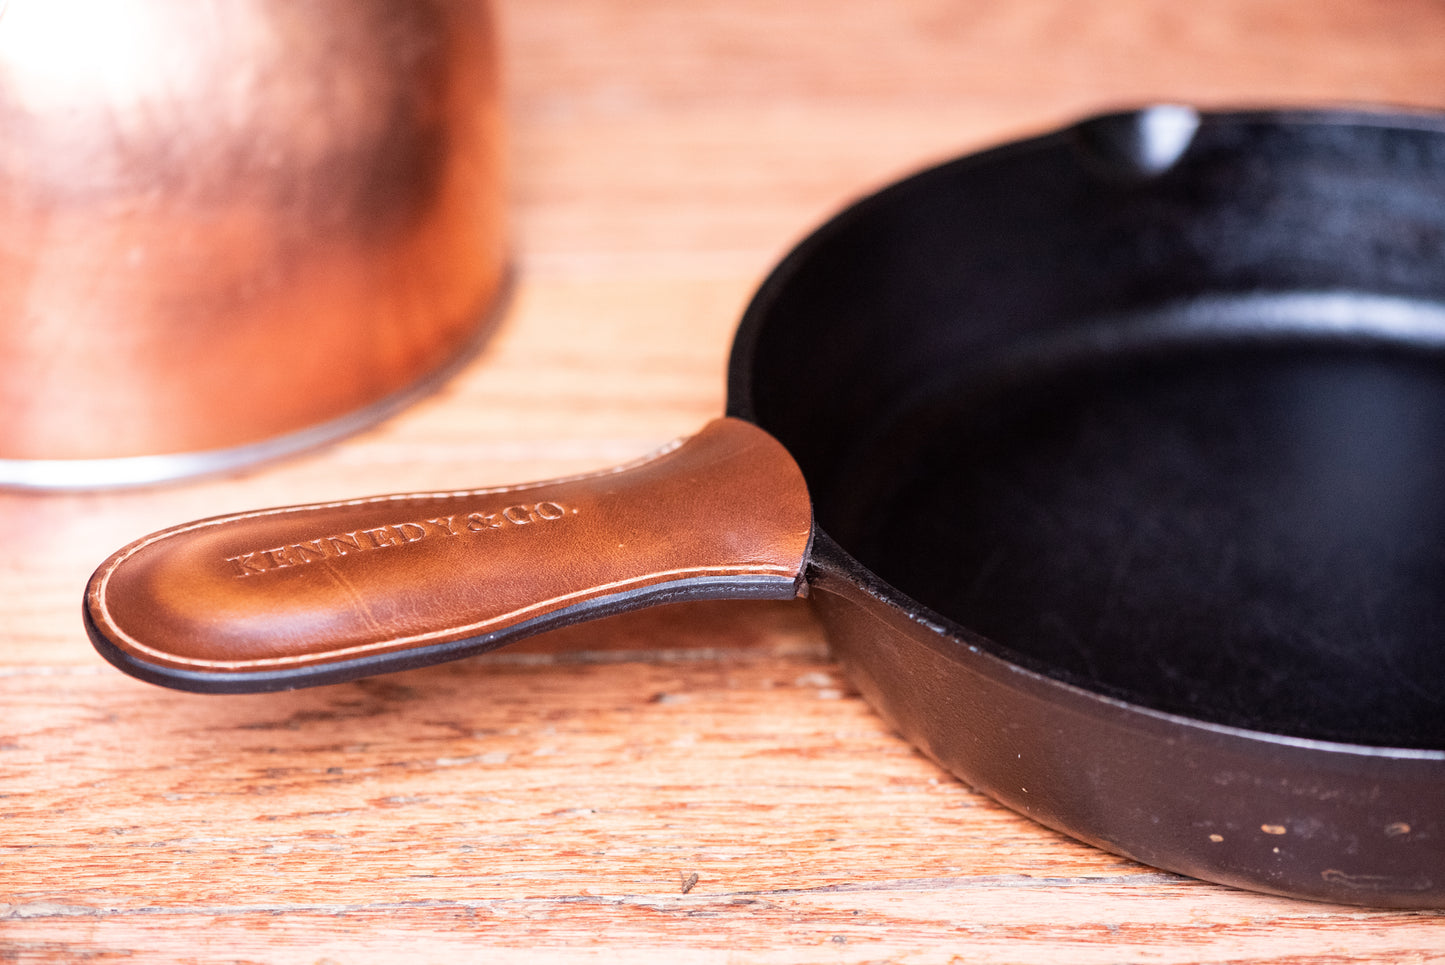 Leather Cast Iron Pan Handle Holder